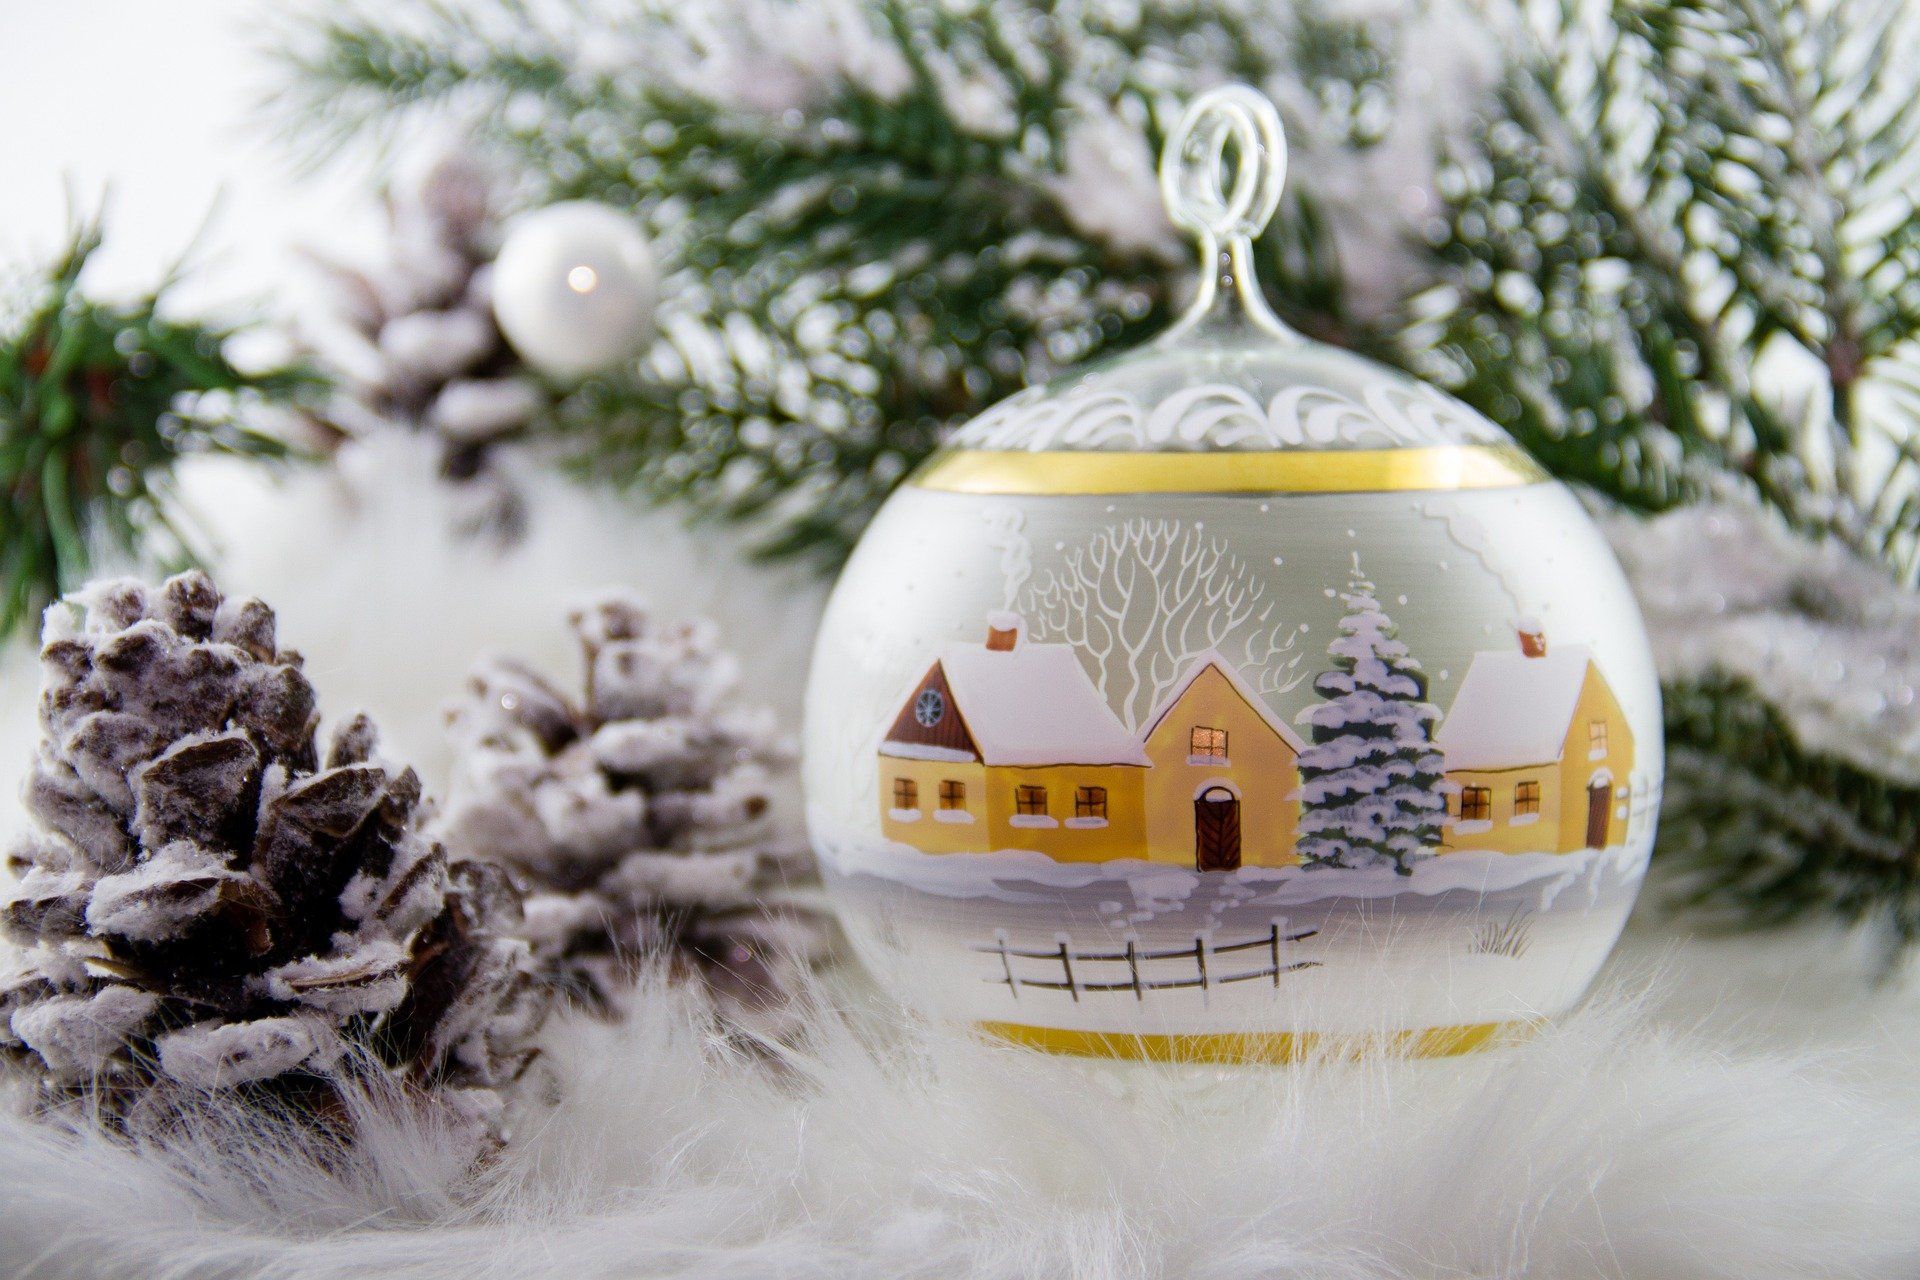 snow covered trees and a white Christmas ornament with a hand-painted house on it.